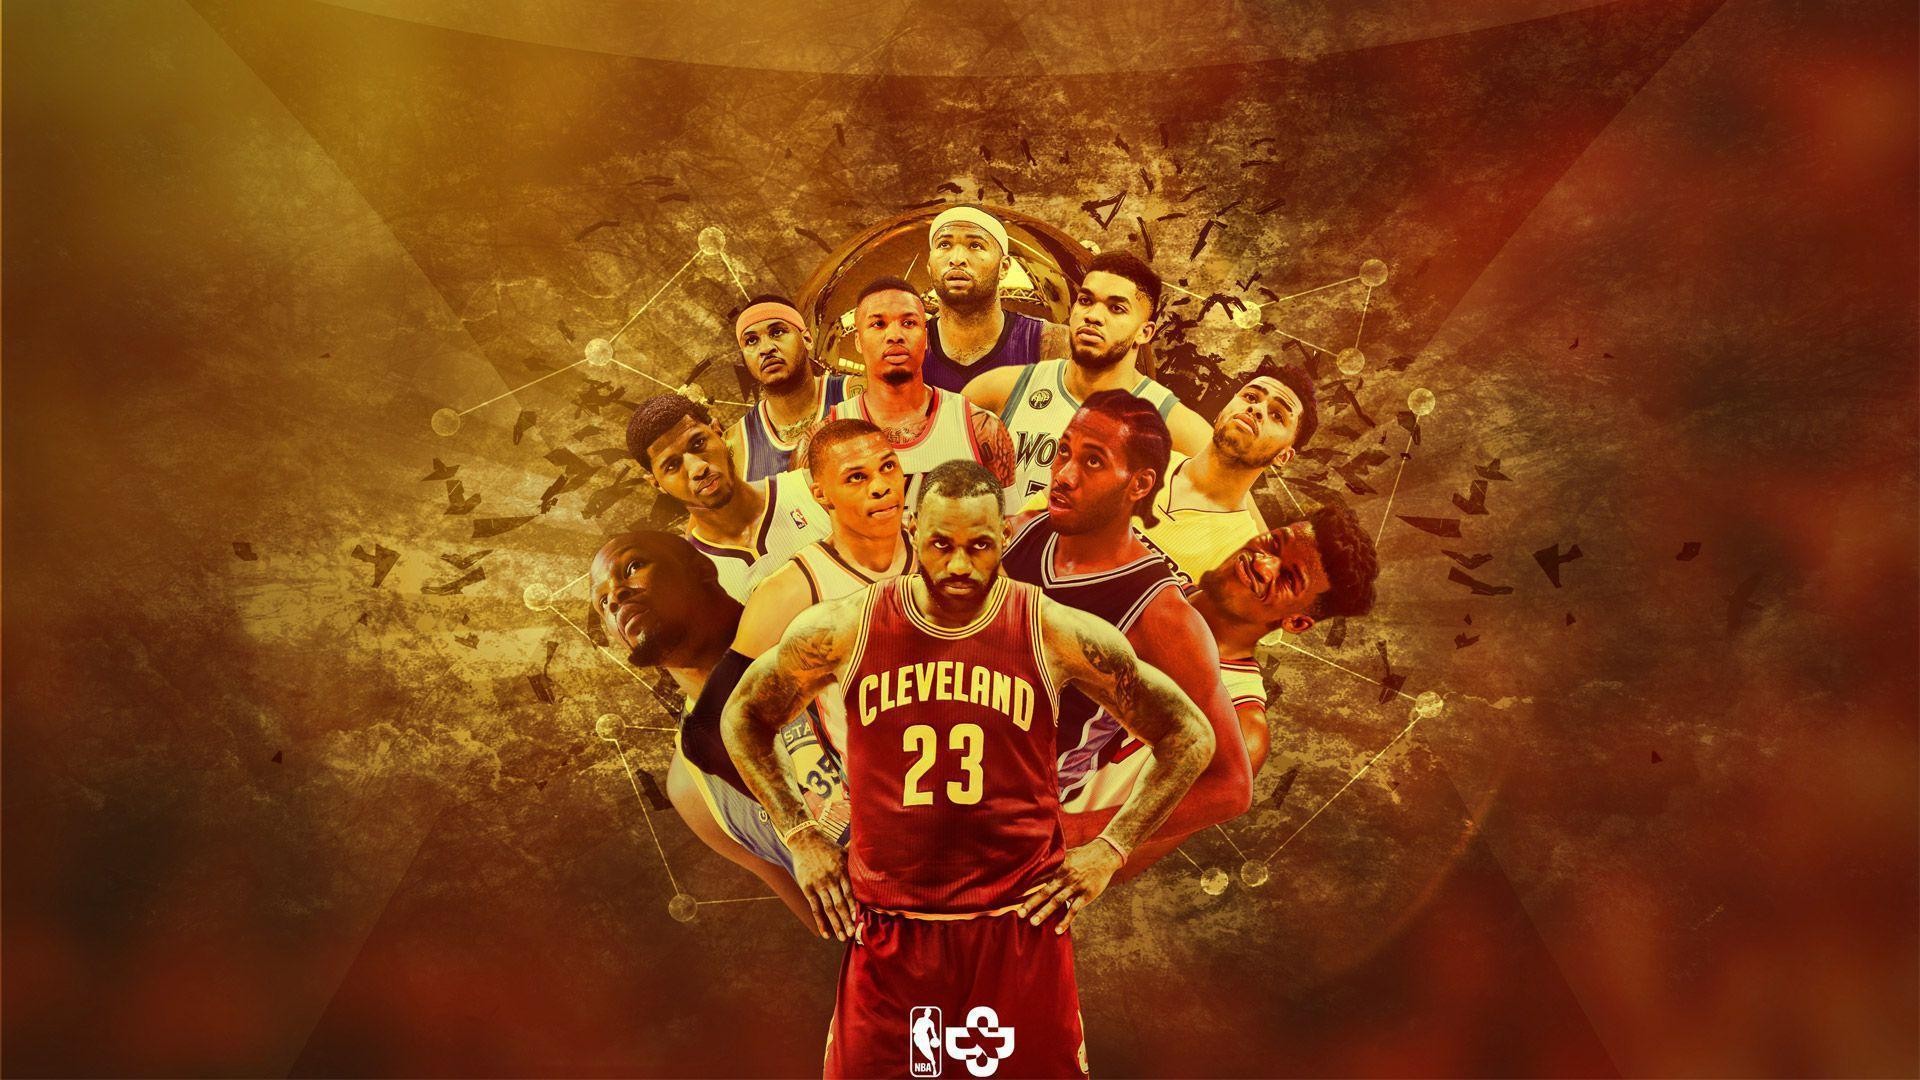 NBA Mac Backgrounds with image dimensions 1920x1080 pixel. You can make this wallpaper for your Desktop Computer Backgrounds, Windows or Mac Screensavers, iPhone Lock screen, Tablet or Android and another Mobile Phone device